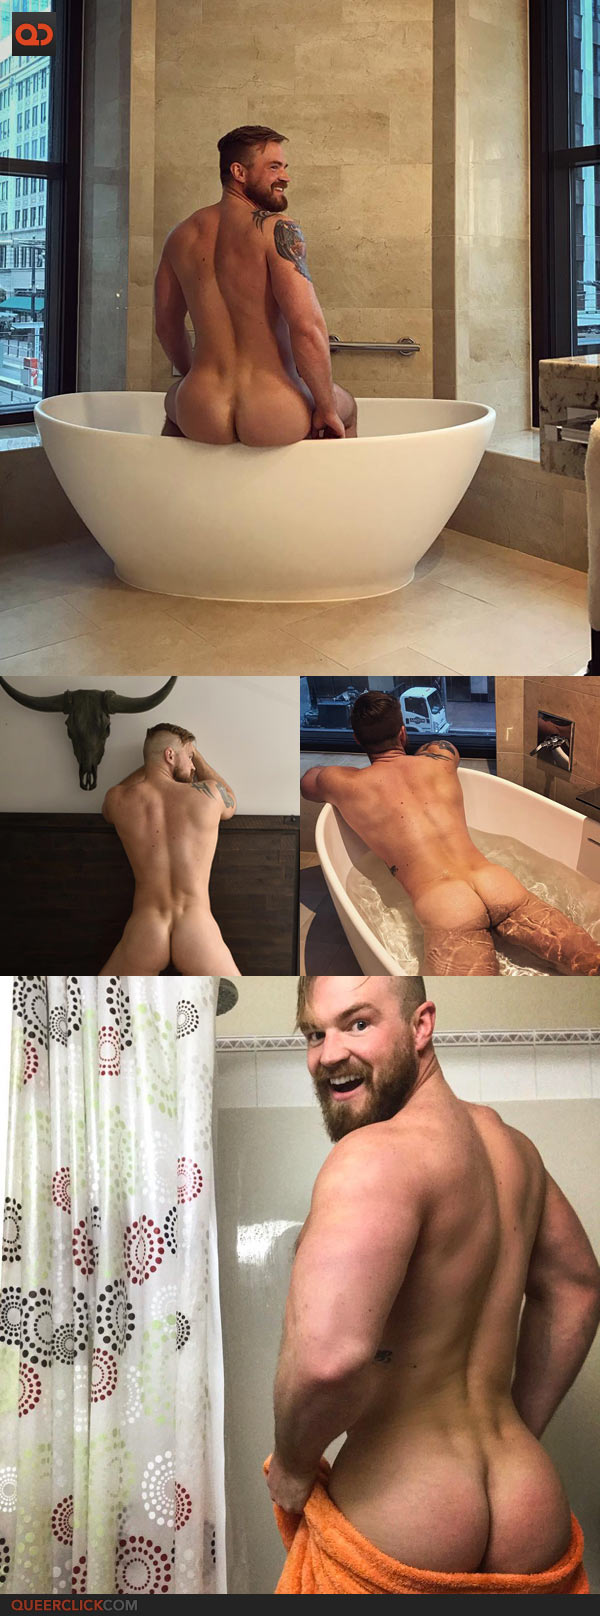 Ten Muscle Butts From Instagram That You Need In Your Life This Week!